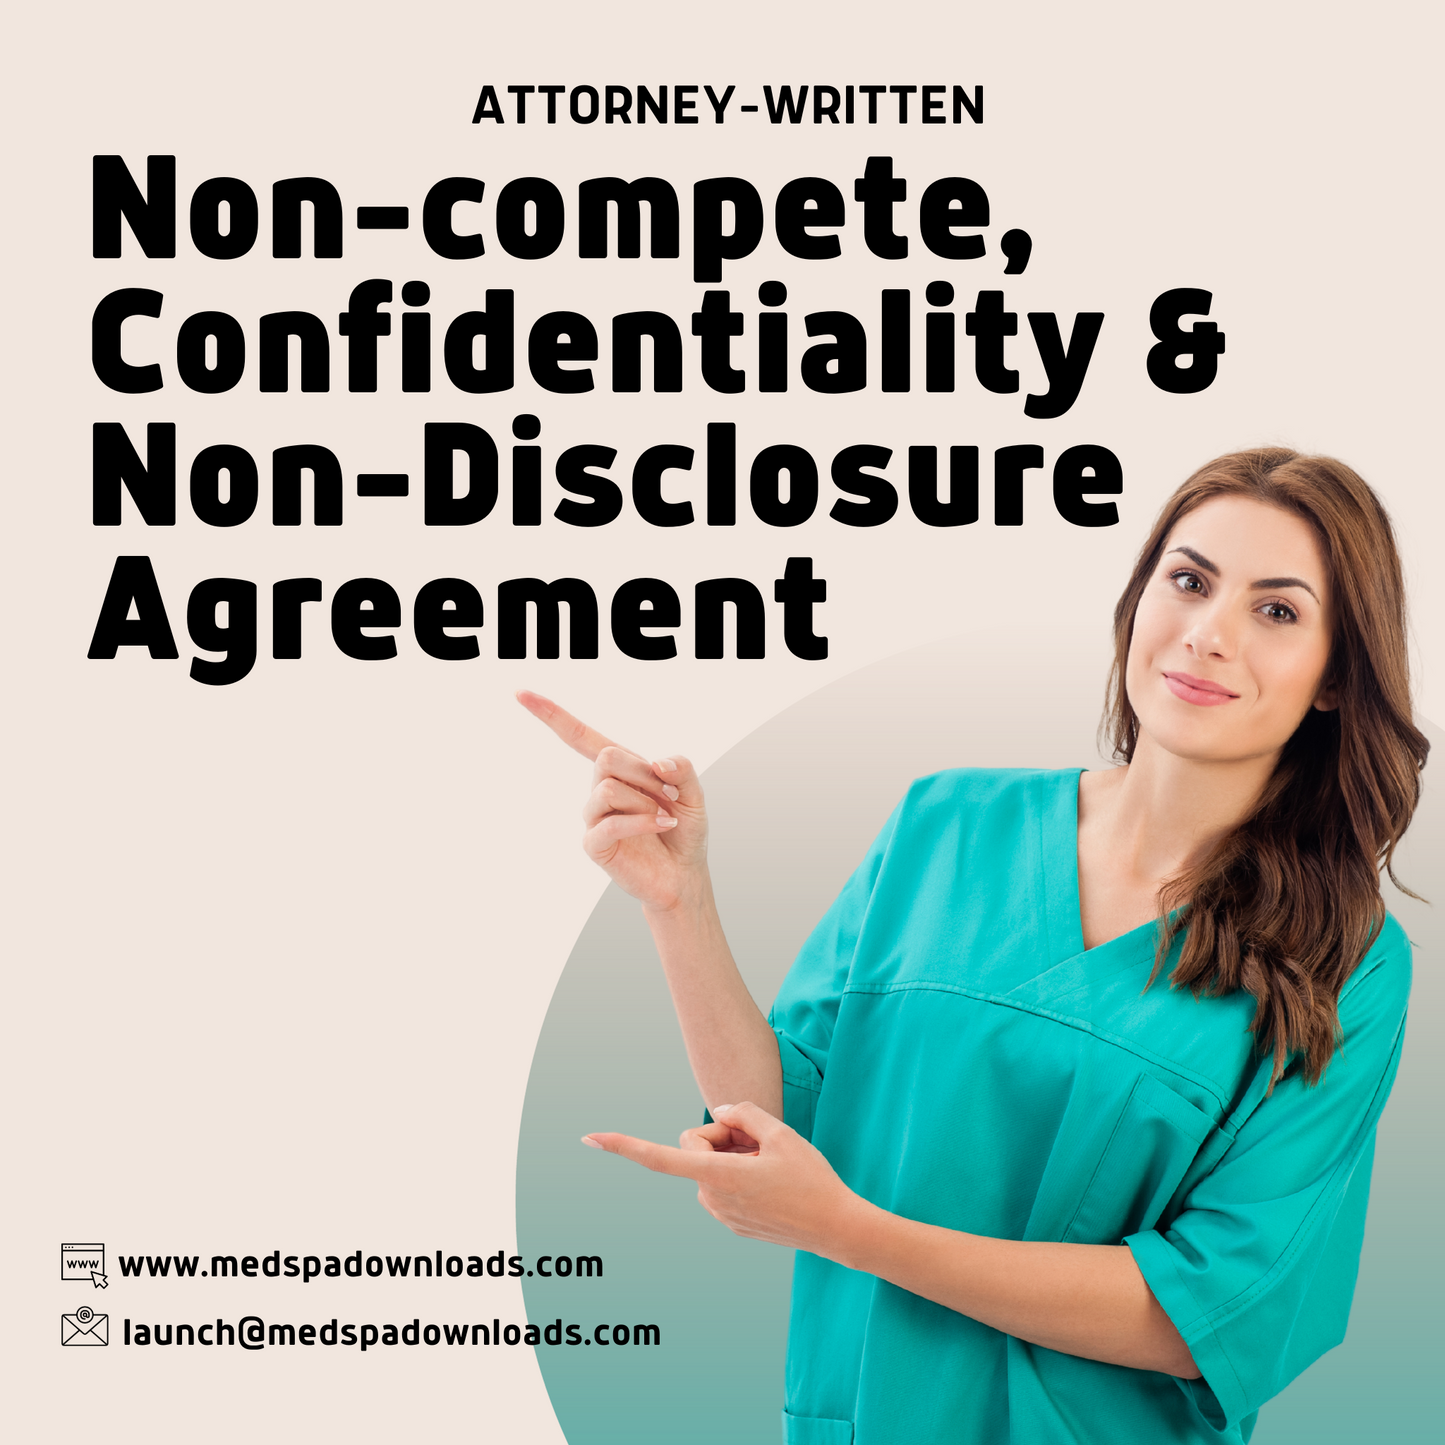 Medical SPA Non-compete, Confidentiality and Non-Disclosure Agreement